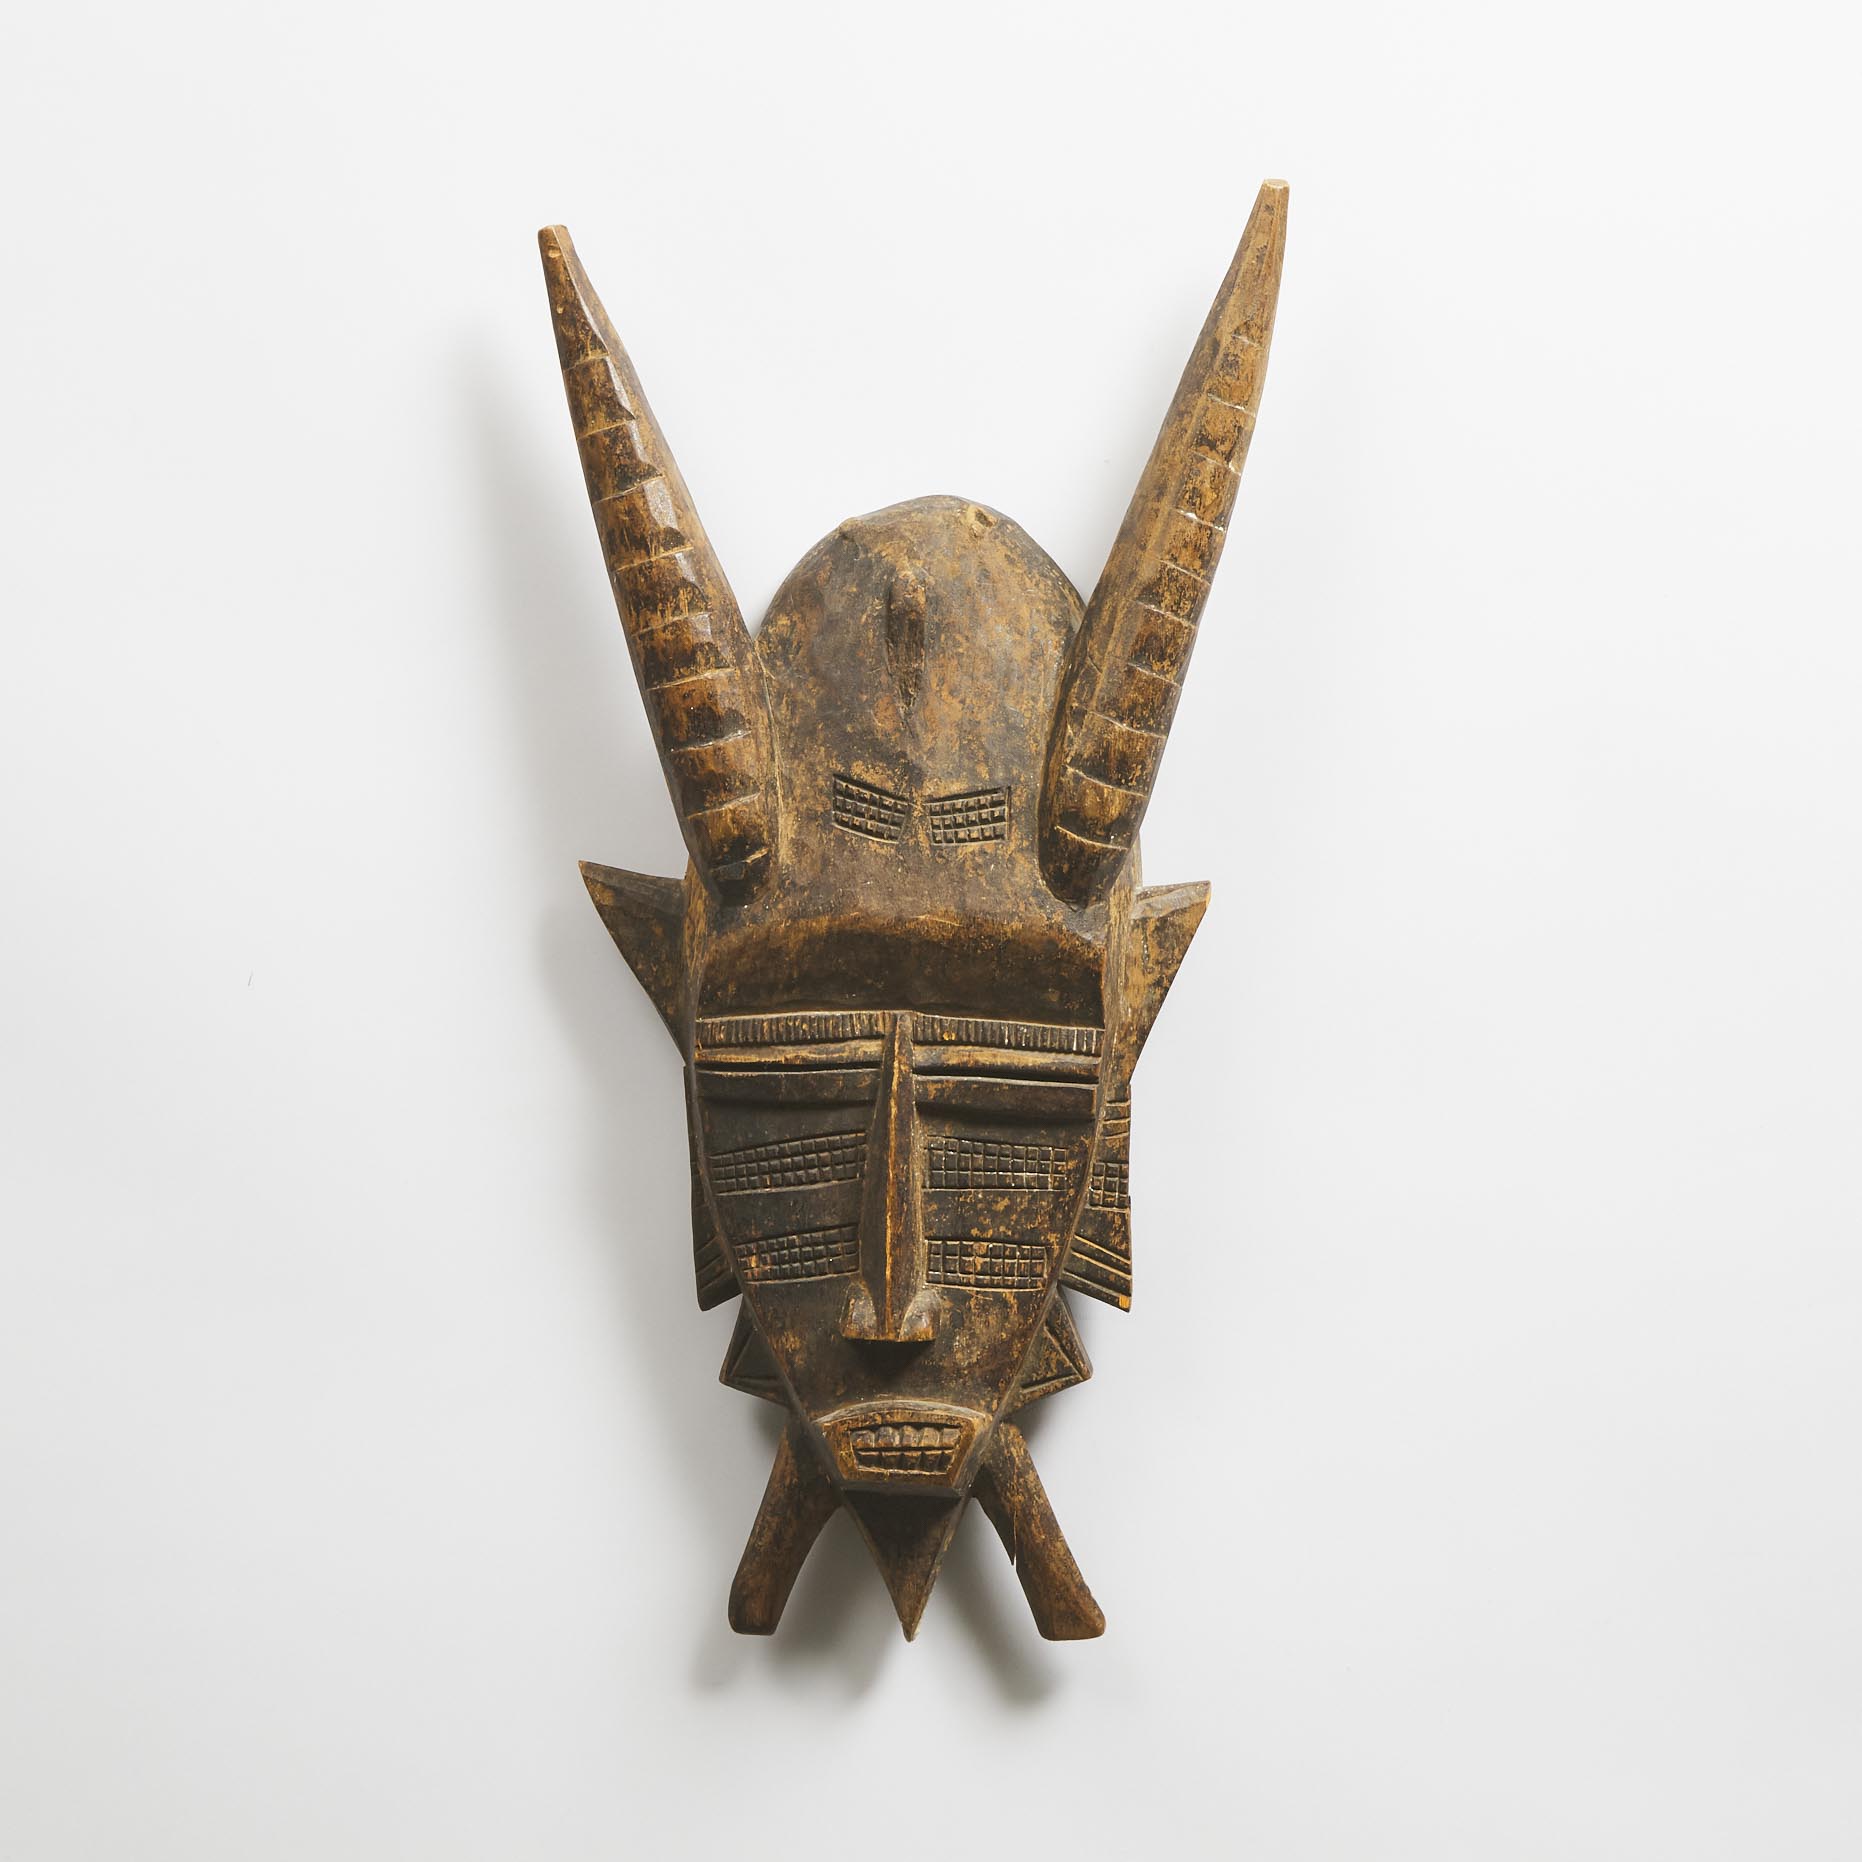 Senufo Kpelie Mask, West Africa, mid to late 20th century